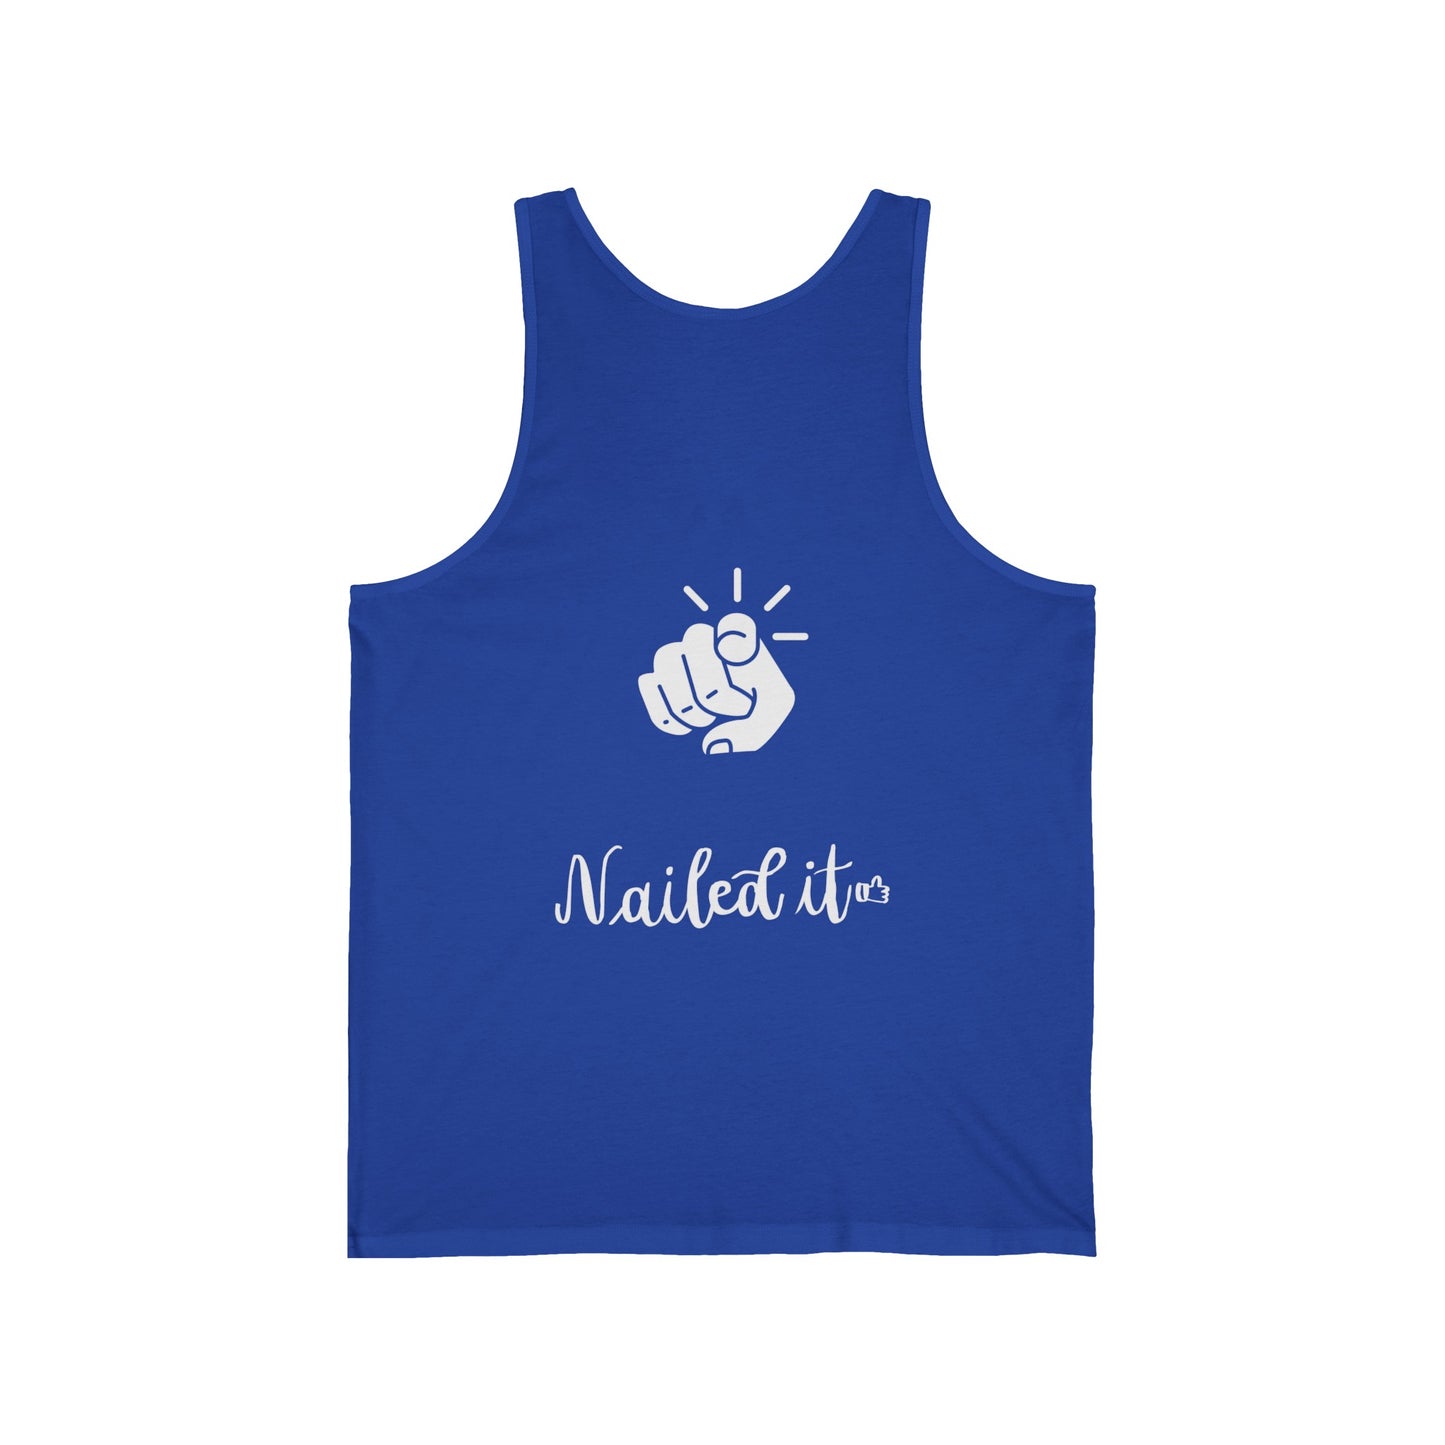 Funny Father's Day Tank Top - "Thanks for Not Pulling Out" & "You Nailed It" with Sperm Cell Design